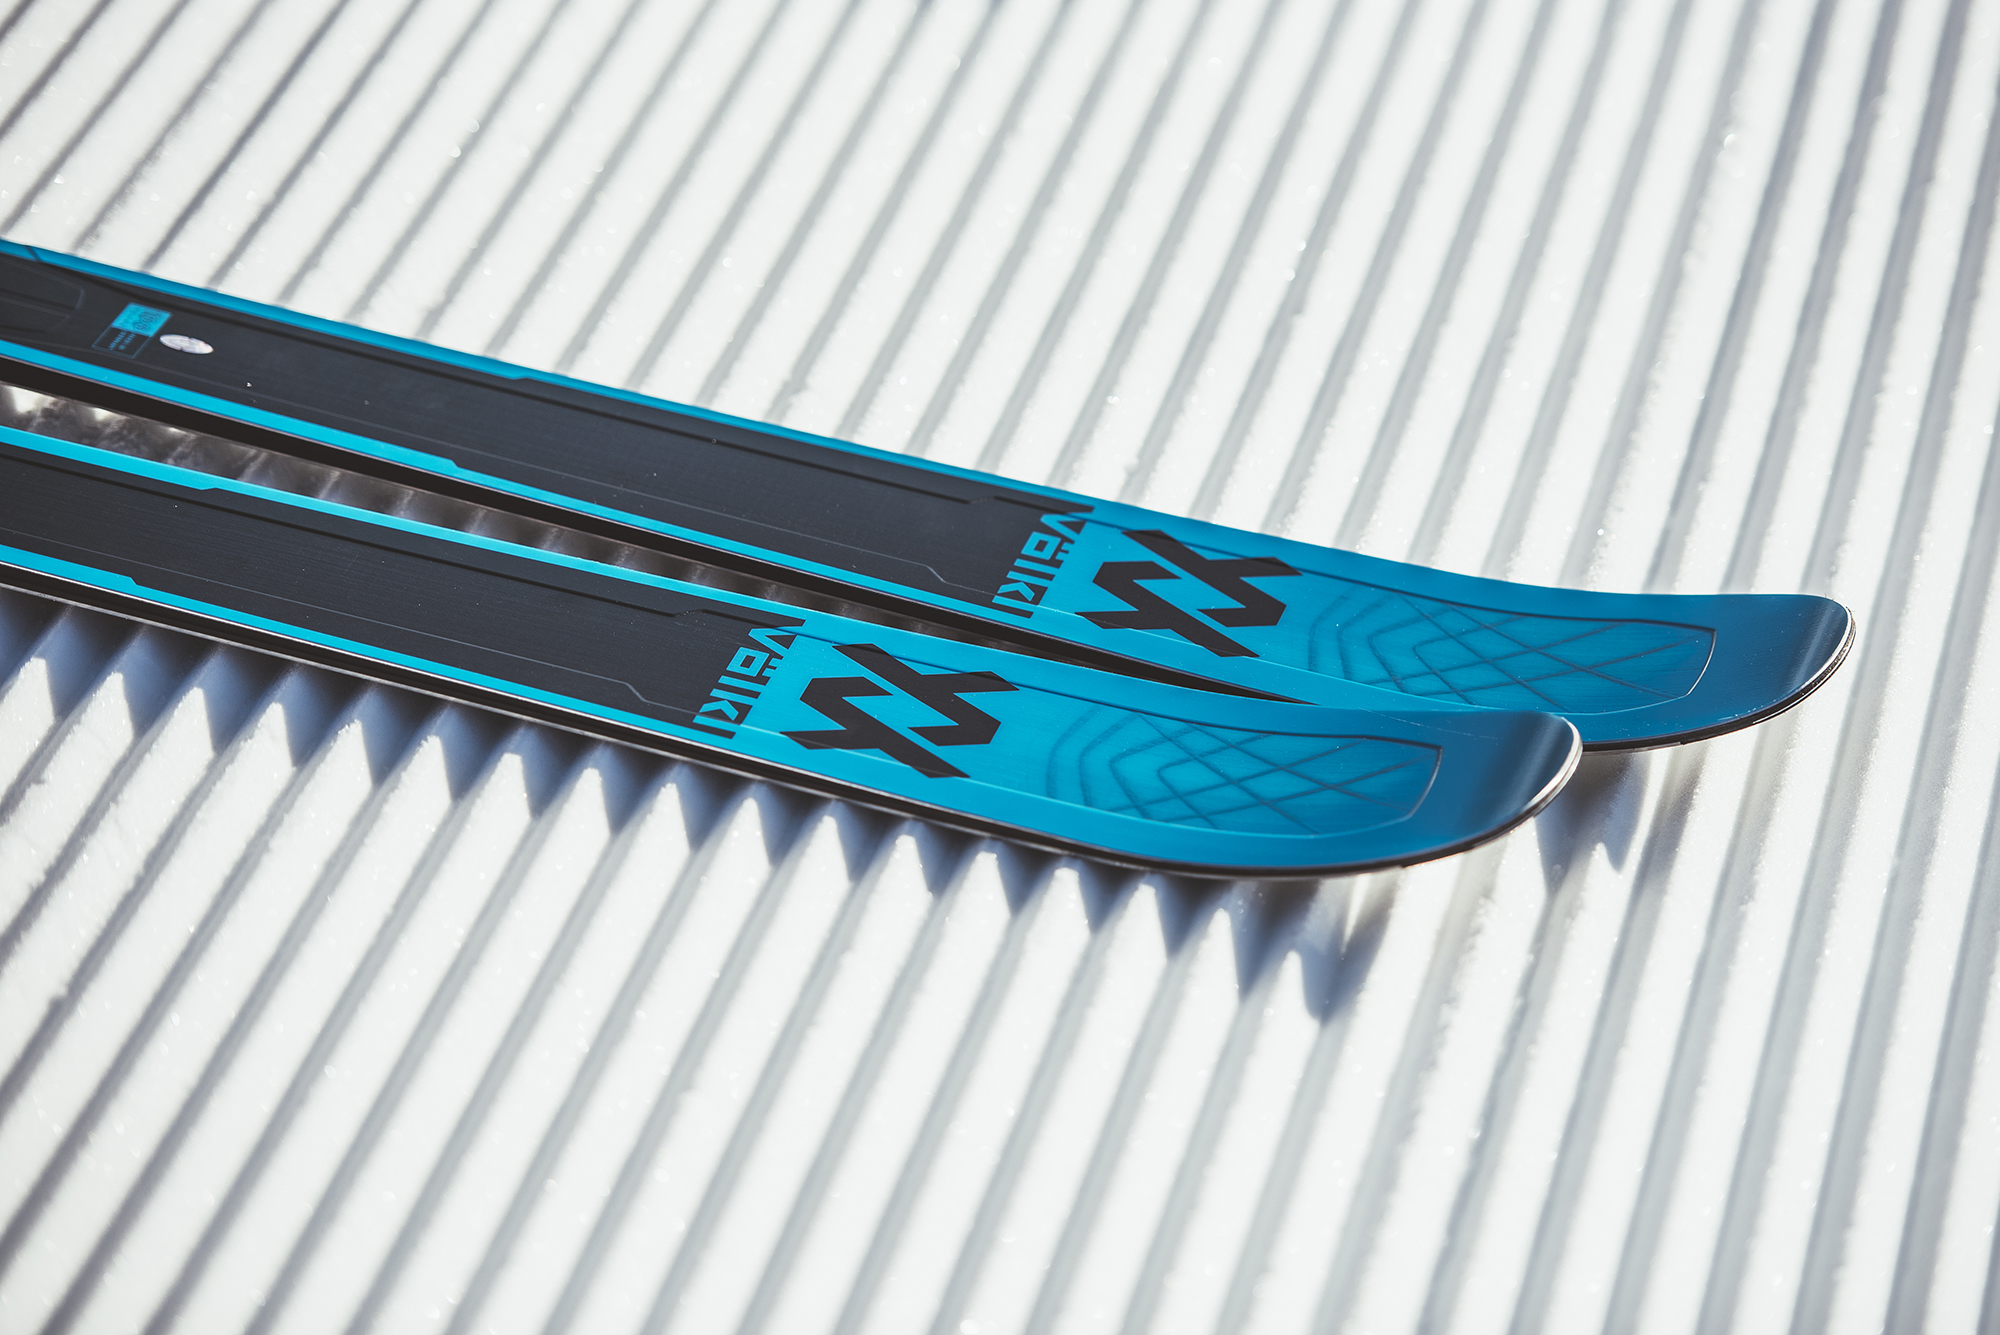 This week Volkl announced 22/23 updates to three of their all-mountain skis: the Kendo 88, Kenja 88, and Mantra 102. Blister discusses the new skis